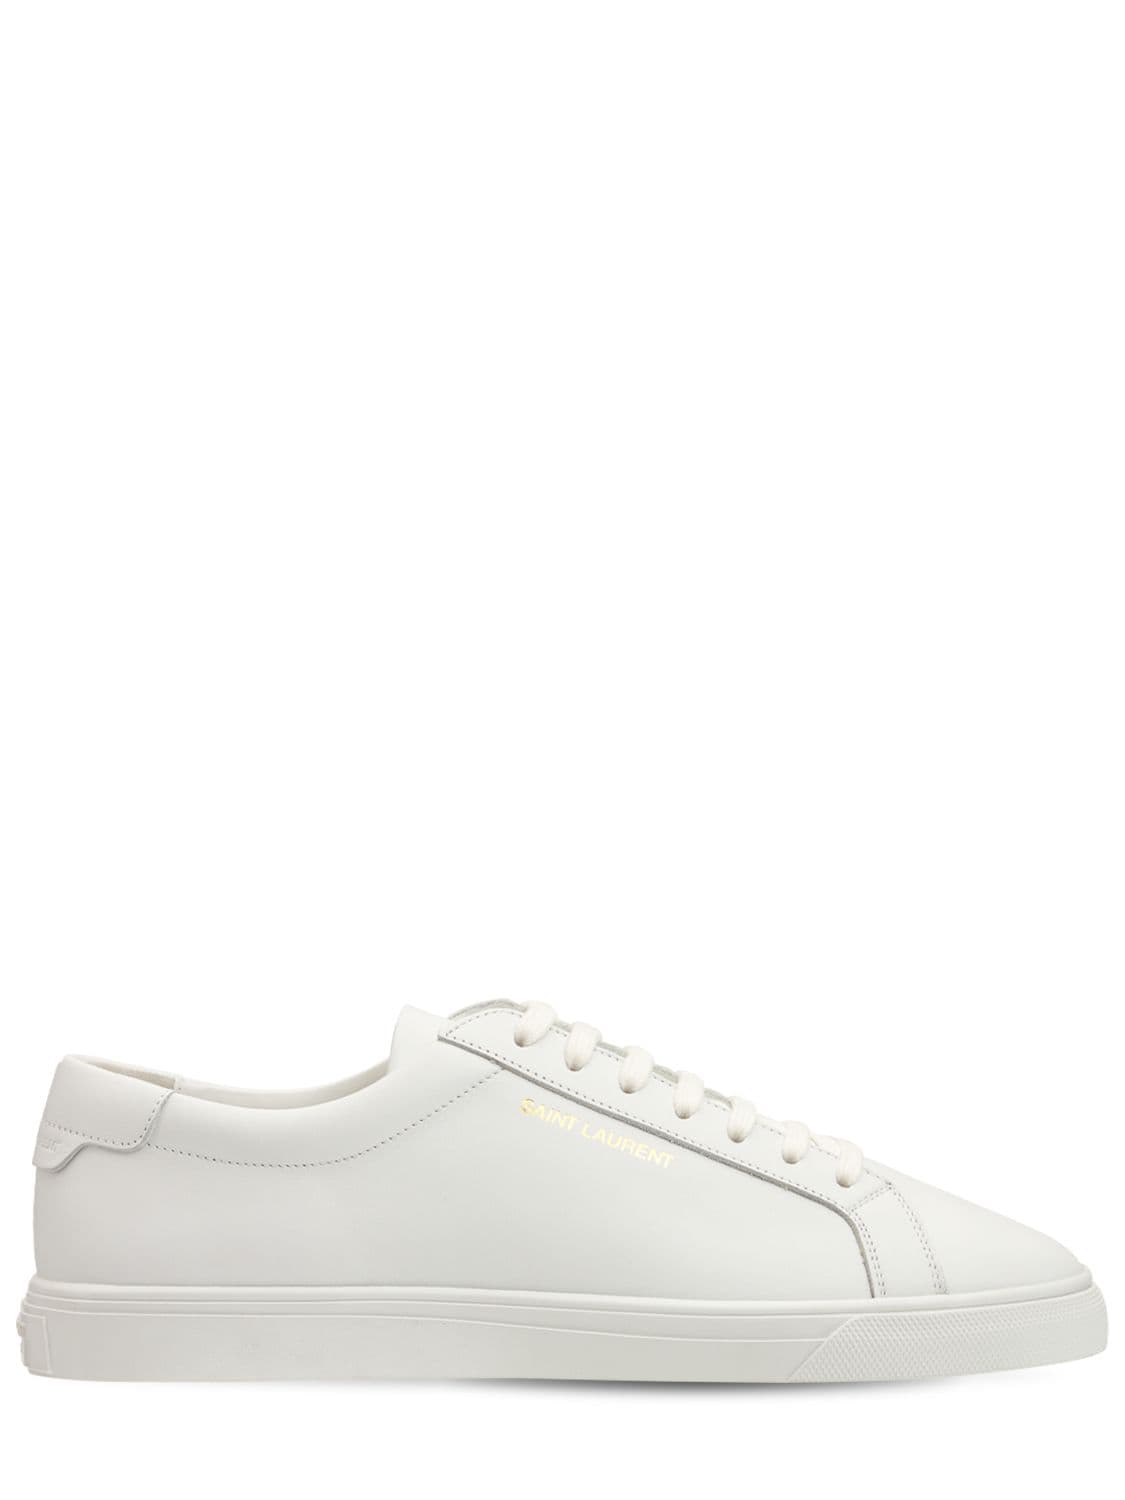 Saint Laurent - 10mm andy leather sneakers - White | Luisaviaroma